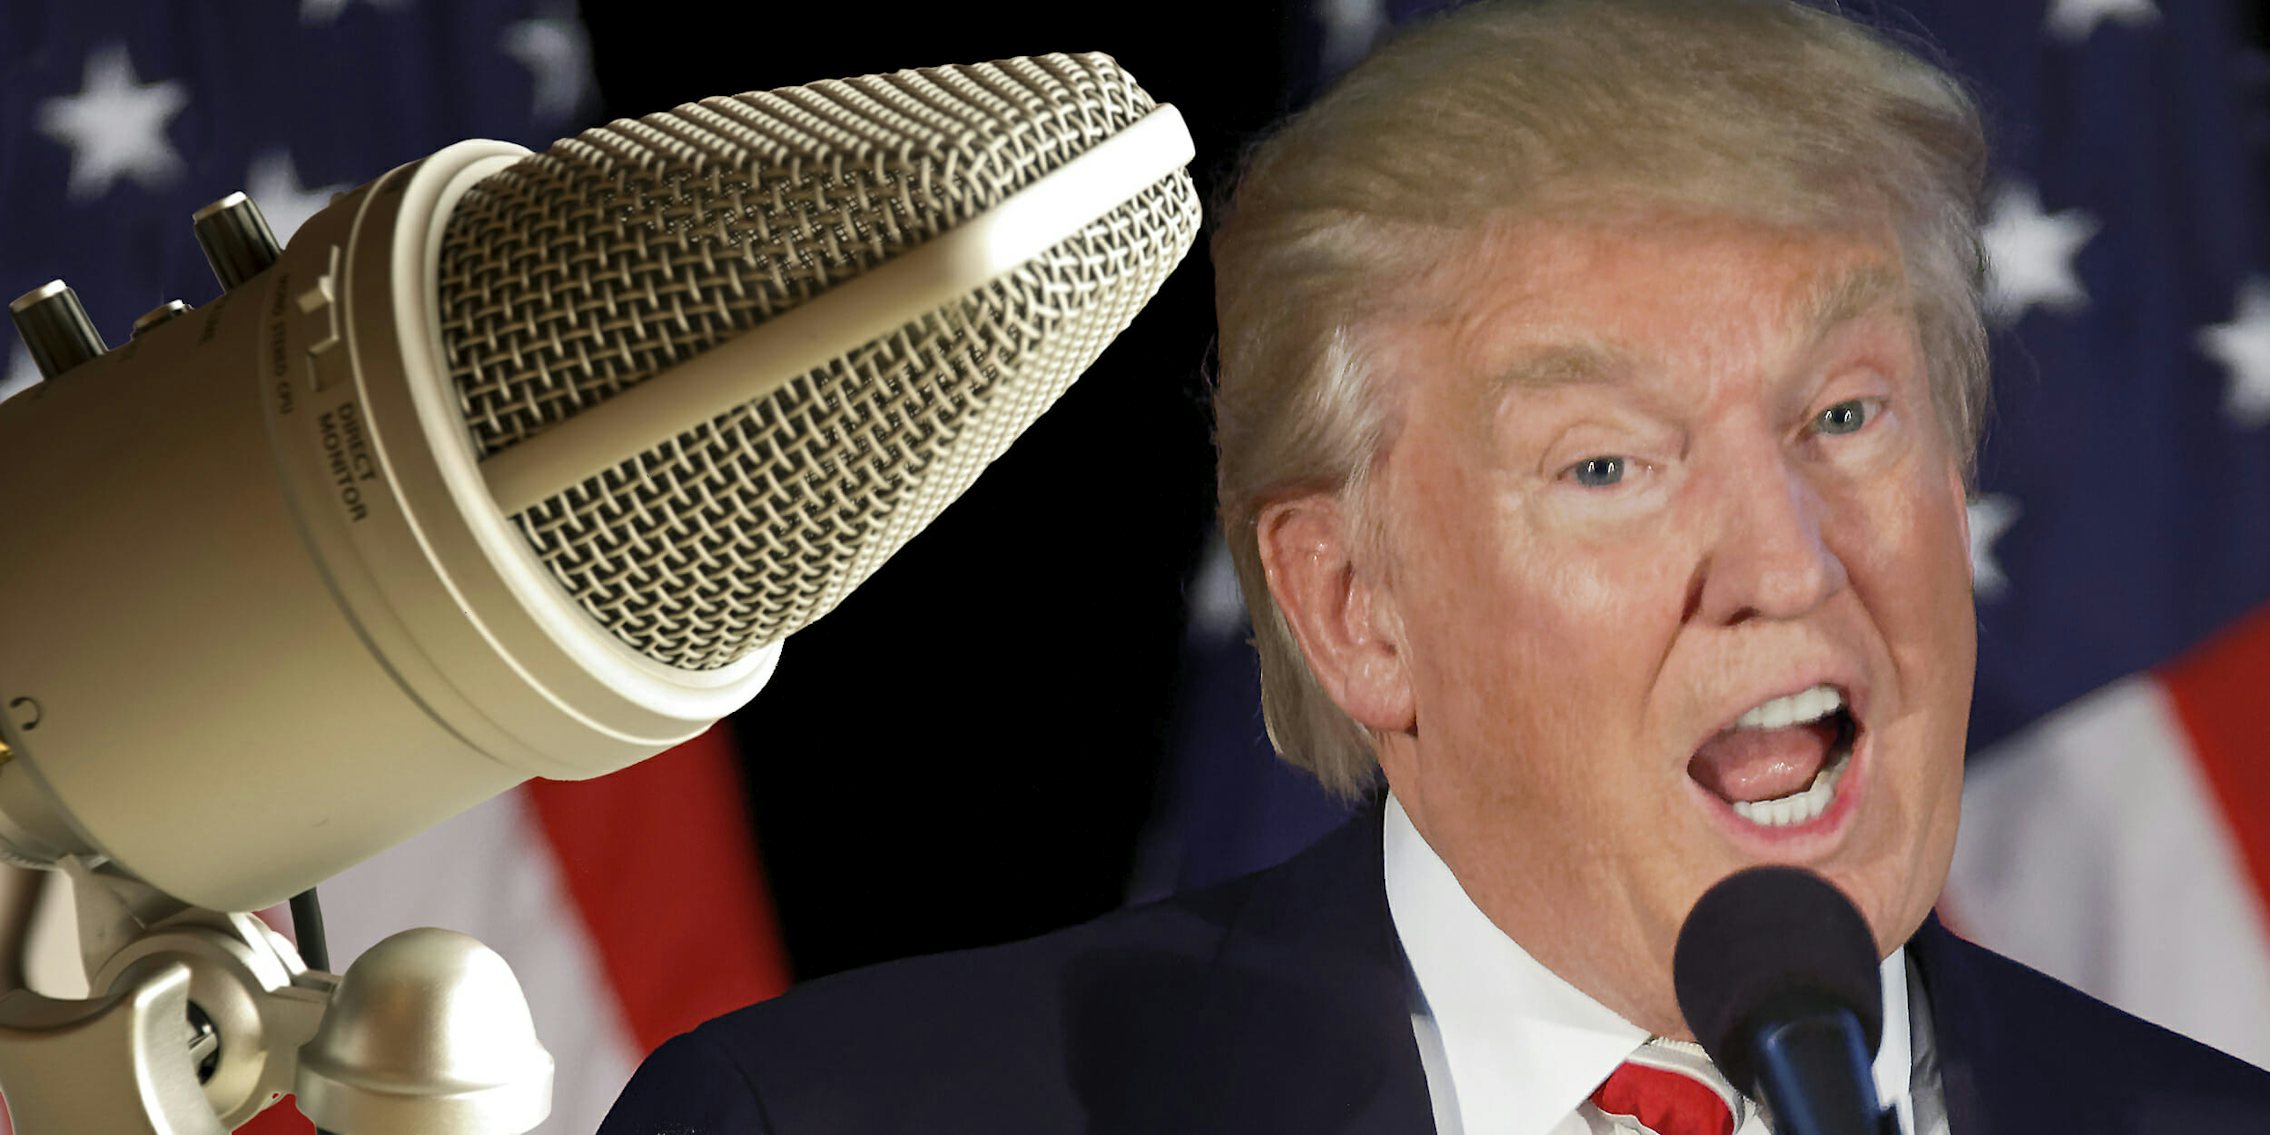 We're All Gonna Die podcast discusses Donald Trump